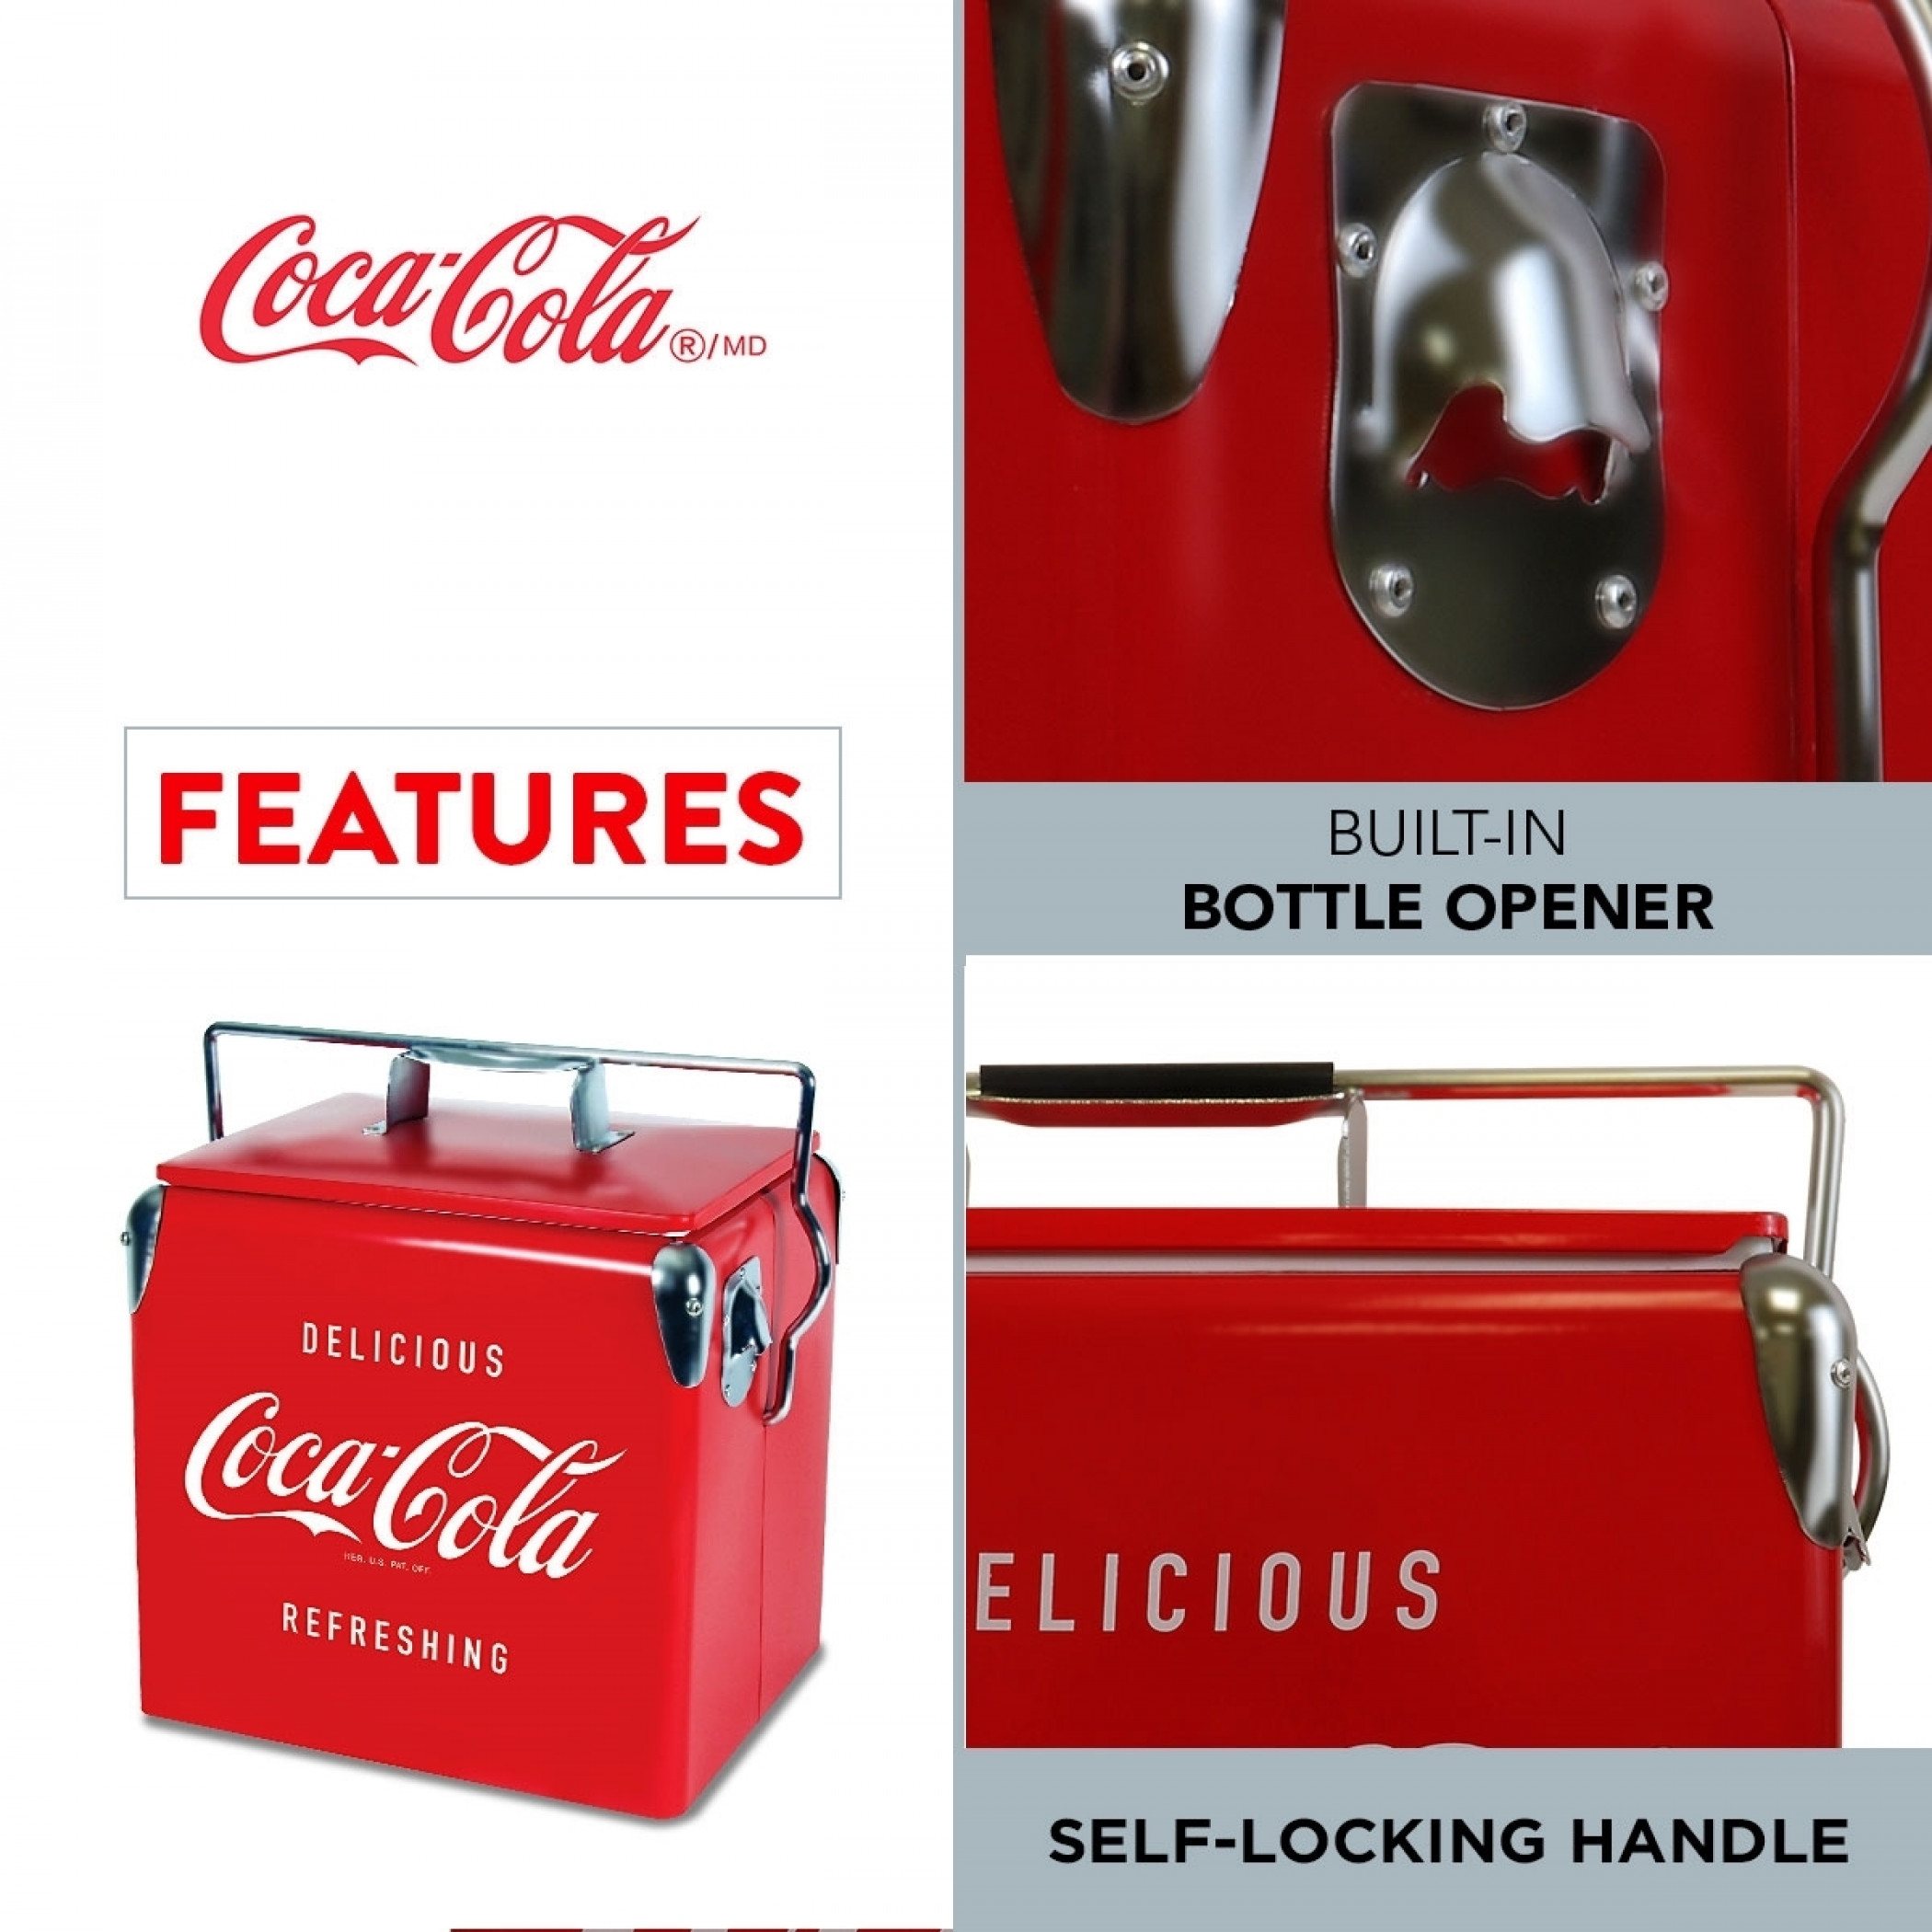 https://mmv2api.s3.us-east-2.amazonaws.com/products/images/0003826_coca-cola-retro-ice-chest-cooler-with-bottle-opener-13l.jpeg